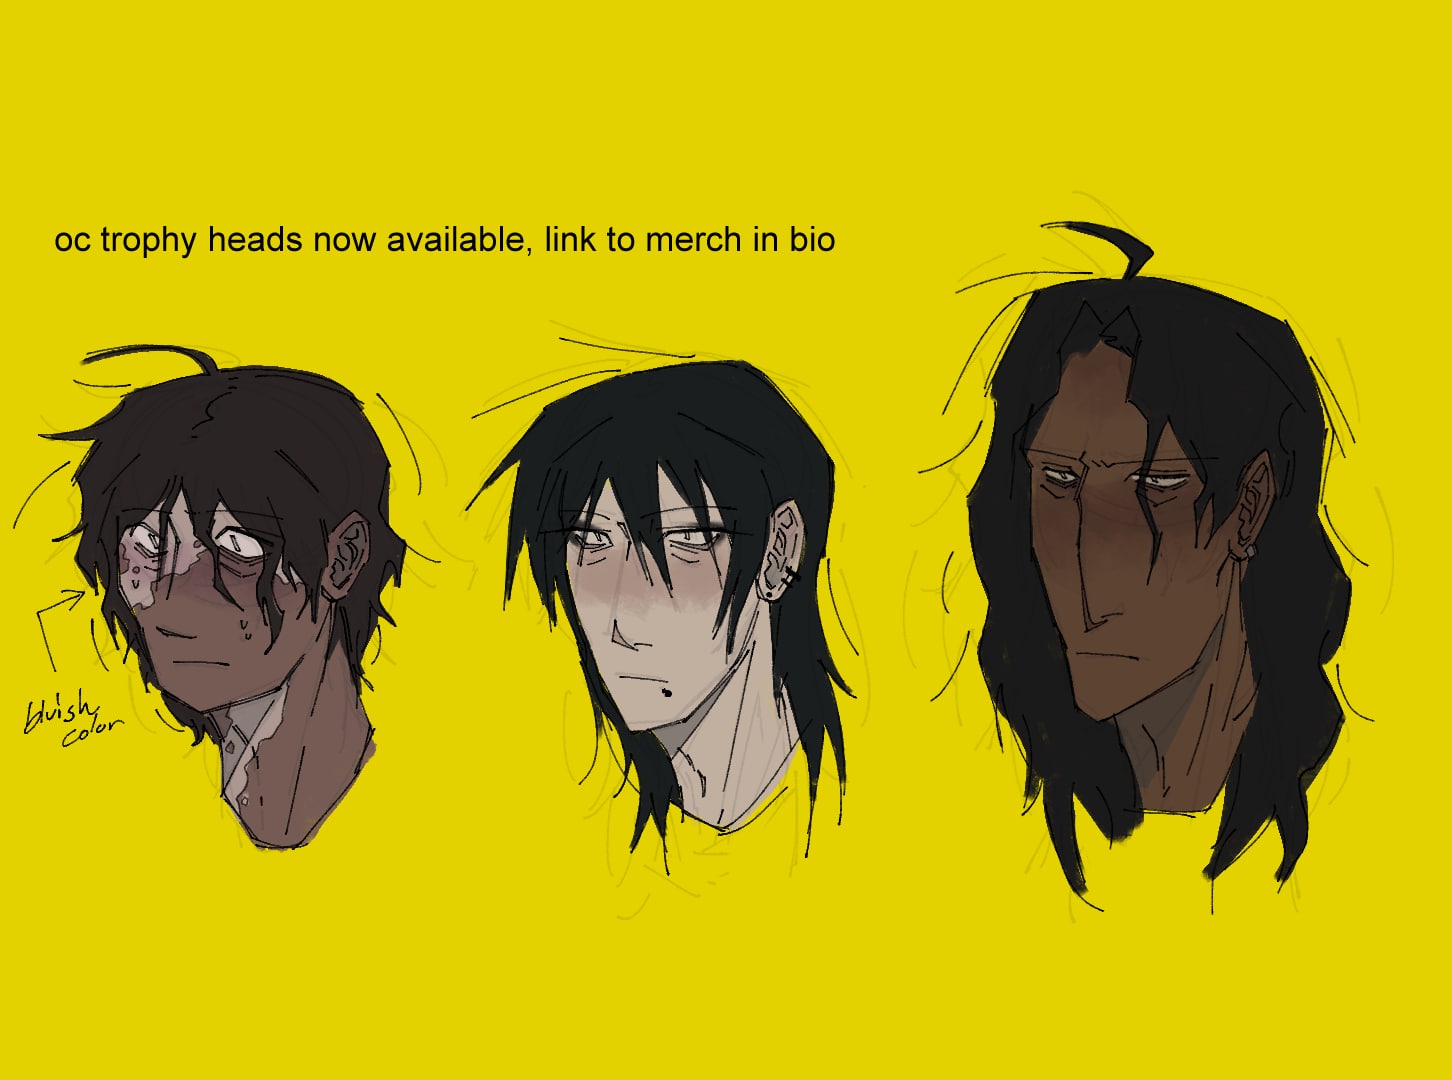 A lineup of my characters Dahlia, Mei, and Ven's heads; there's a caption that reads 'oc trophy heads now available, link to merch in bio'